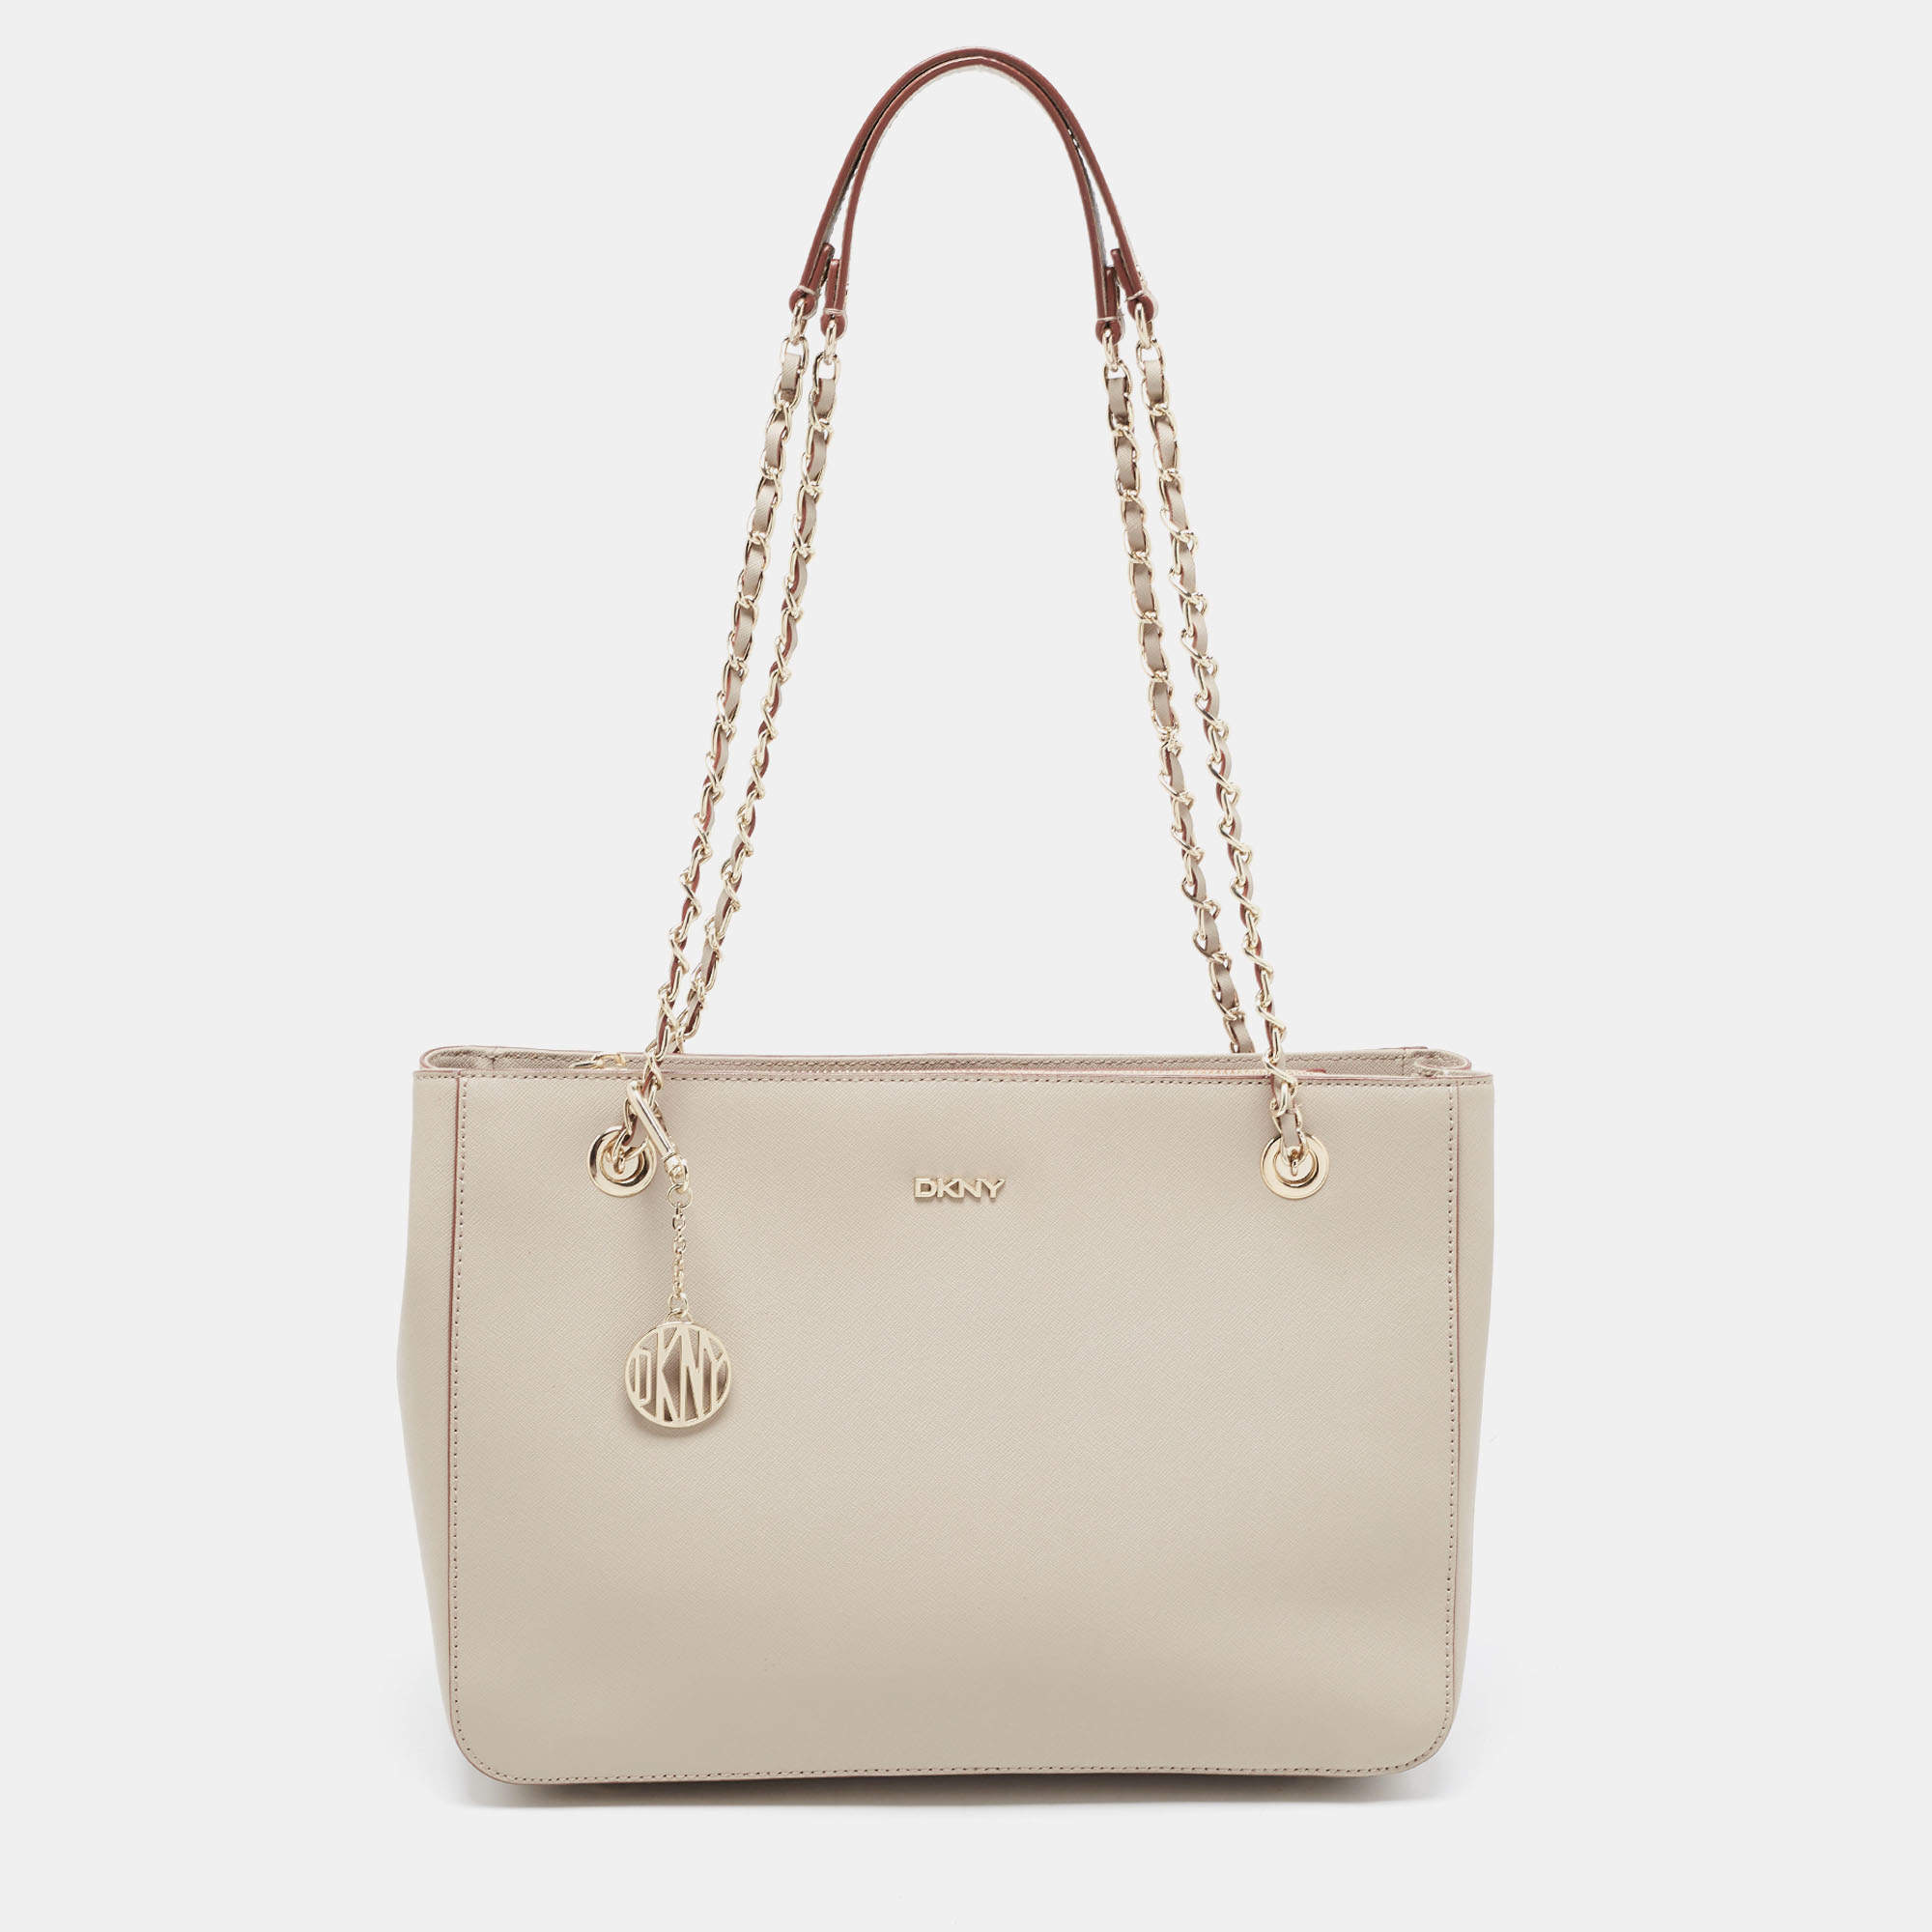 Dkny All Over Off White Tote Bag